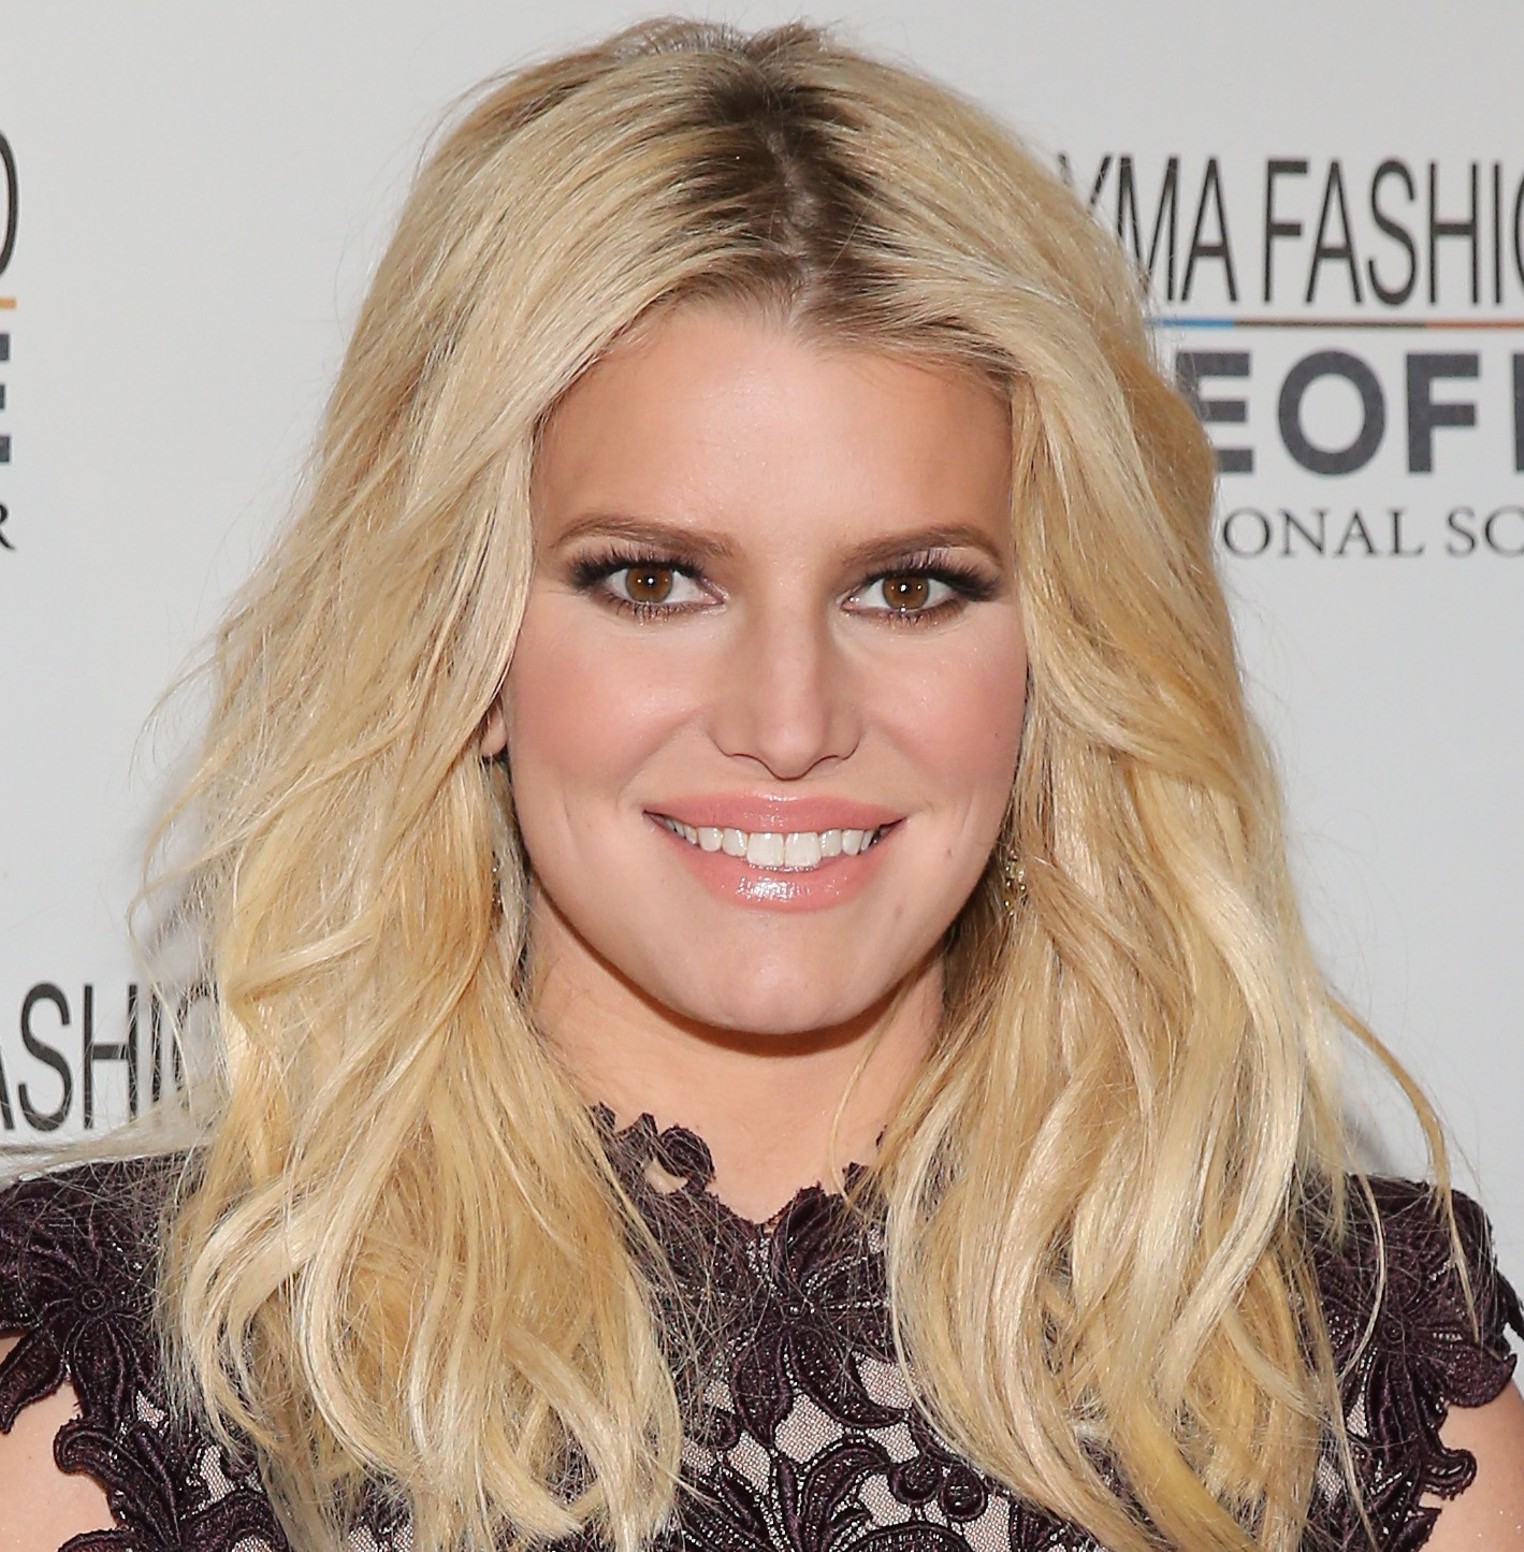 With Her New Book, Jessica Simpson Joins Other Celebrities Shedding an Inescapable Dumb Blonde image | Dallas Observer